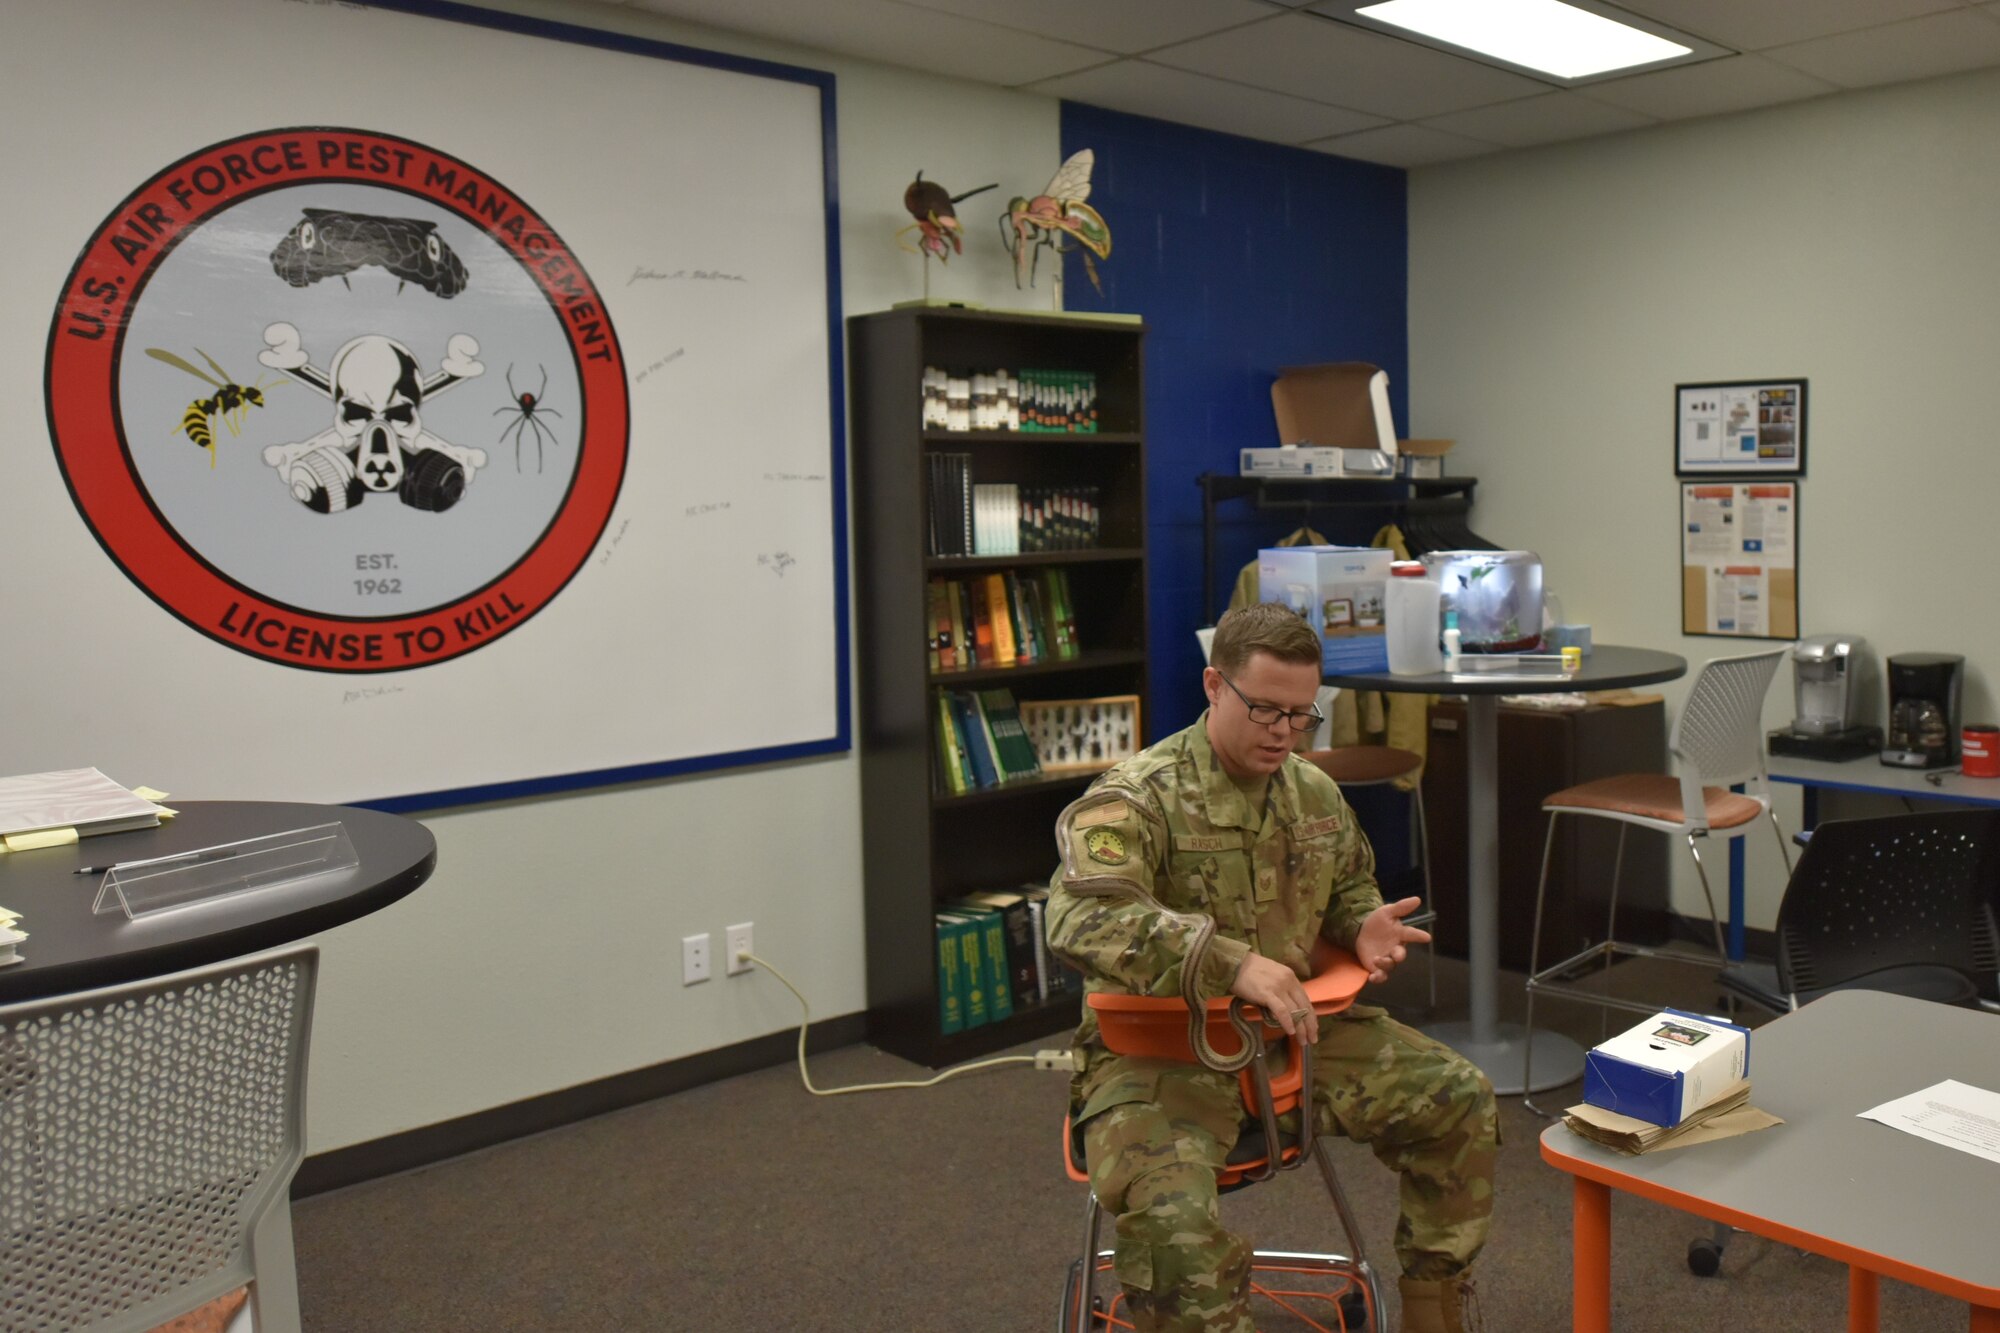 An Airman sits in a seat that allows multiple seating positions for increased student comfort and attention. He is holding a snake.